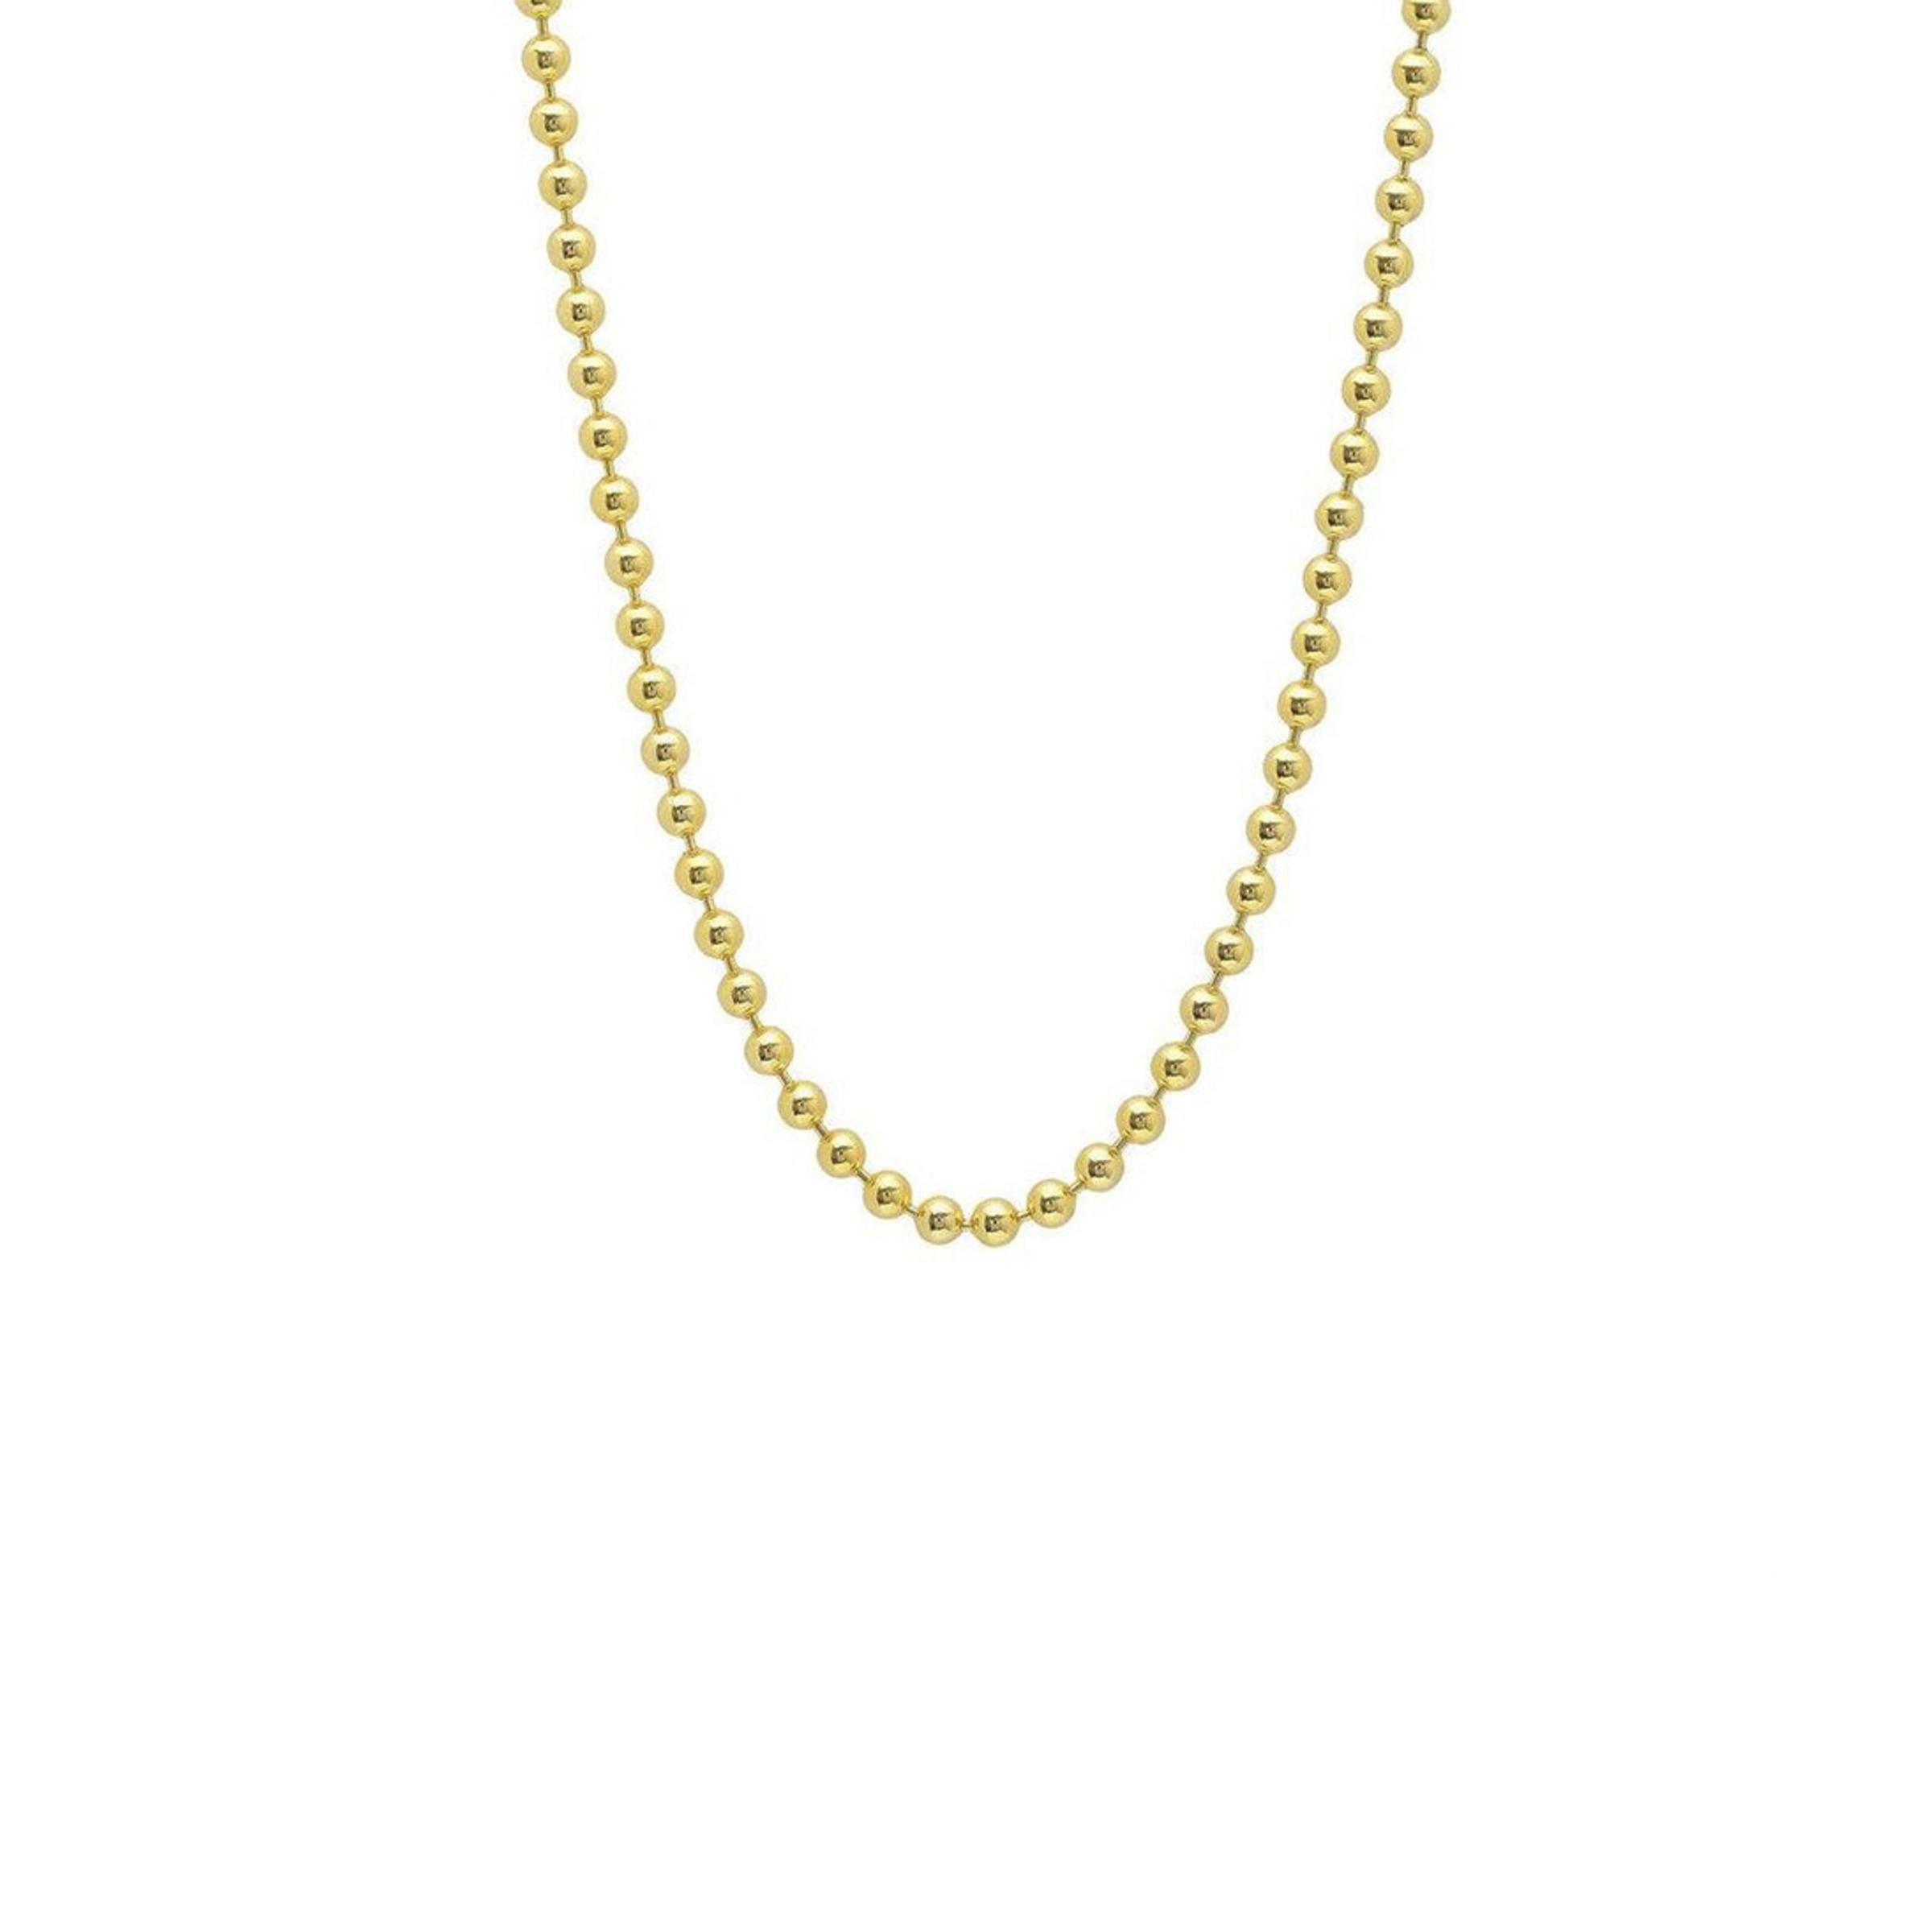 Gold Smiley Heart Pendant with Gold Bead Chain Necklace
